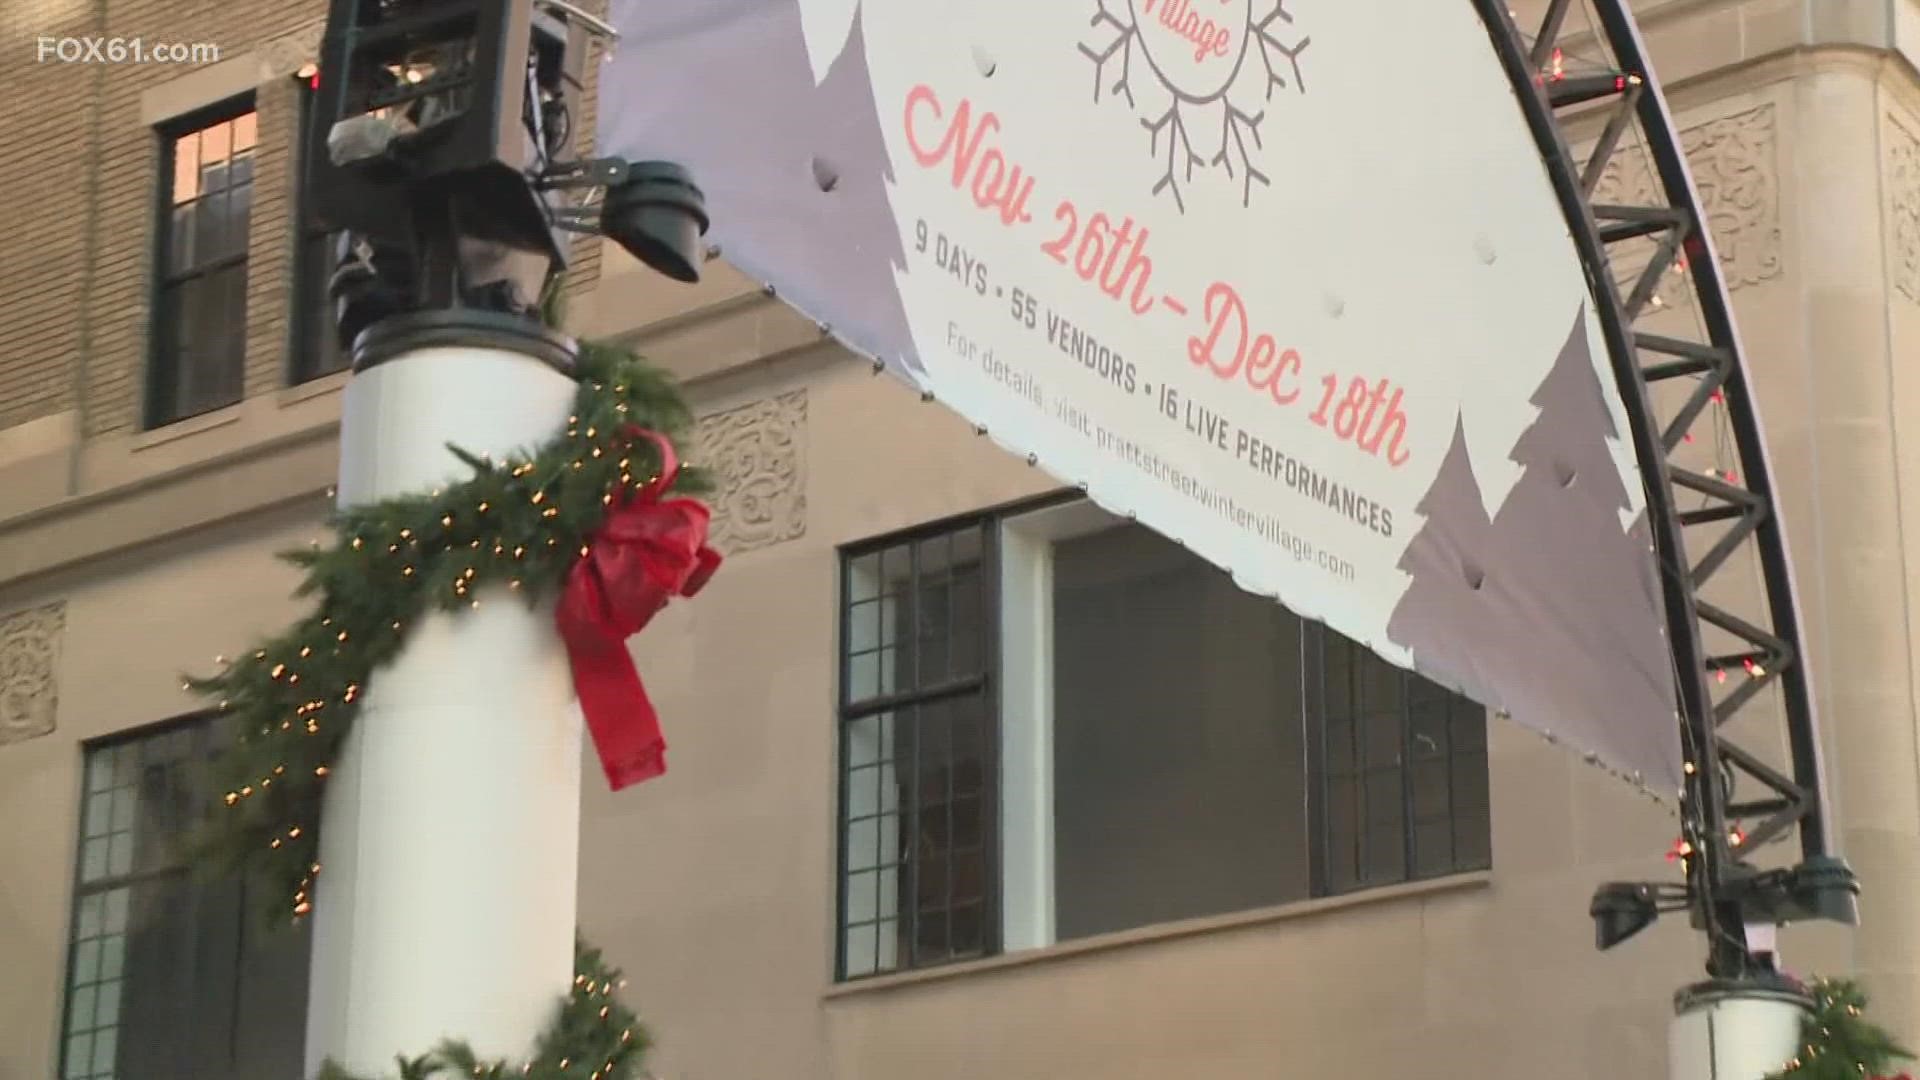 An all-new outdoor holiday market opened Saturday morning on Pratt Street in Hartford just in time to shop locally for any gifts this season.